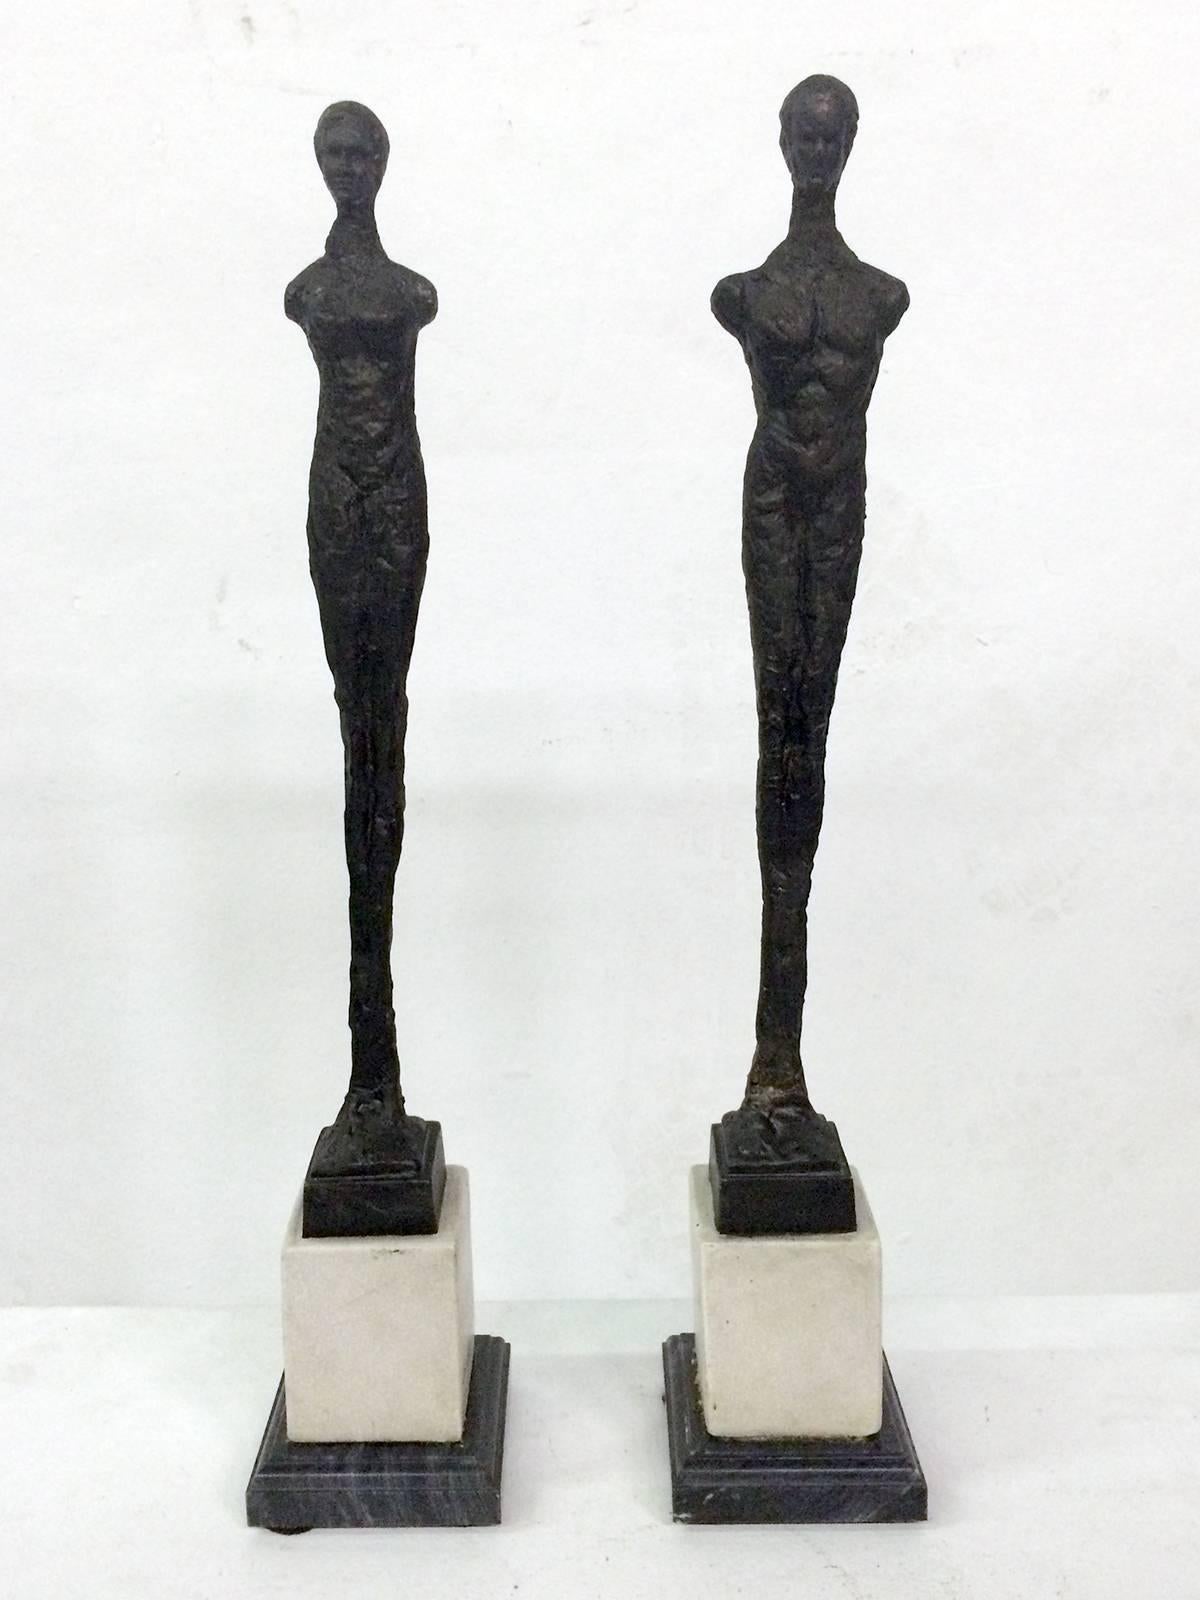 Two figures, one a male and the other one a female on square stepped marble bases. The two stylized standing figures are made of cast resin after original clay sculptures.